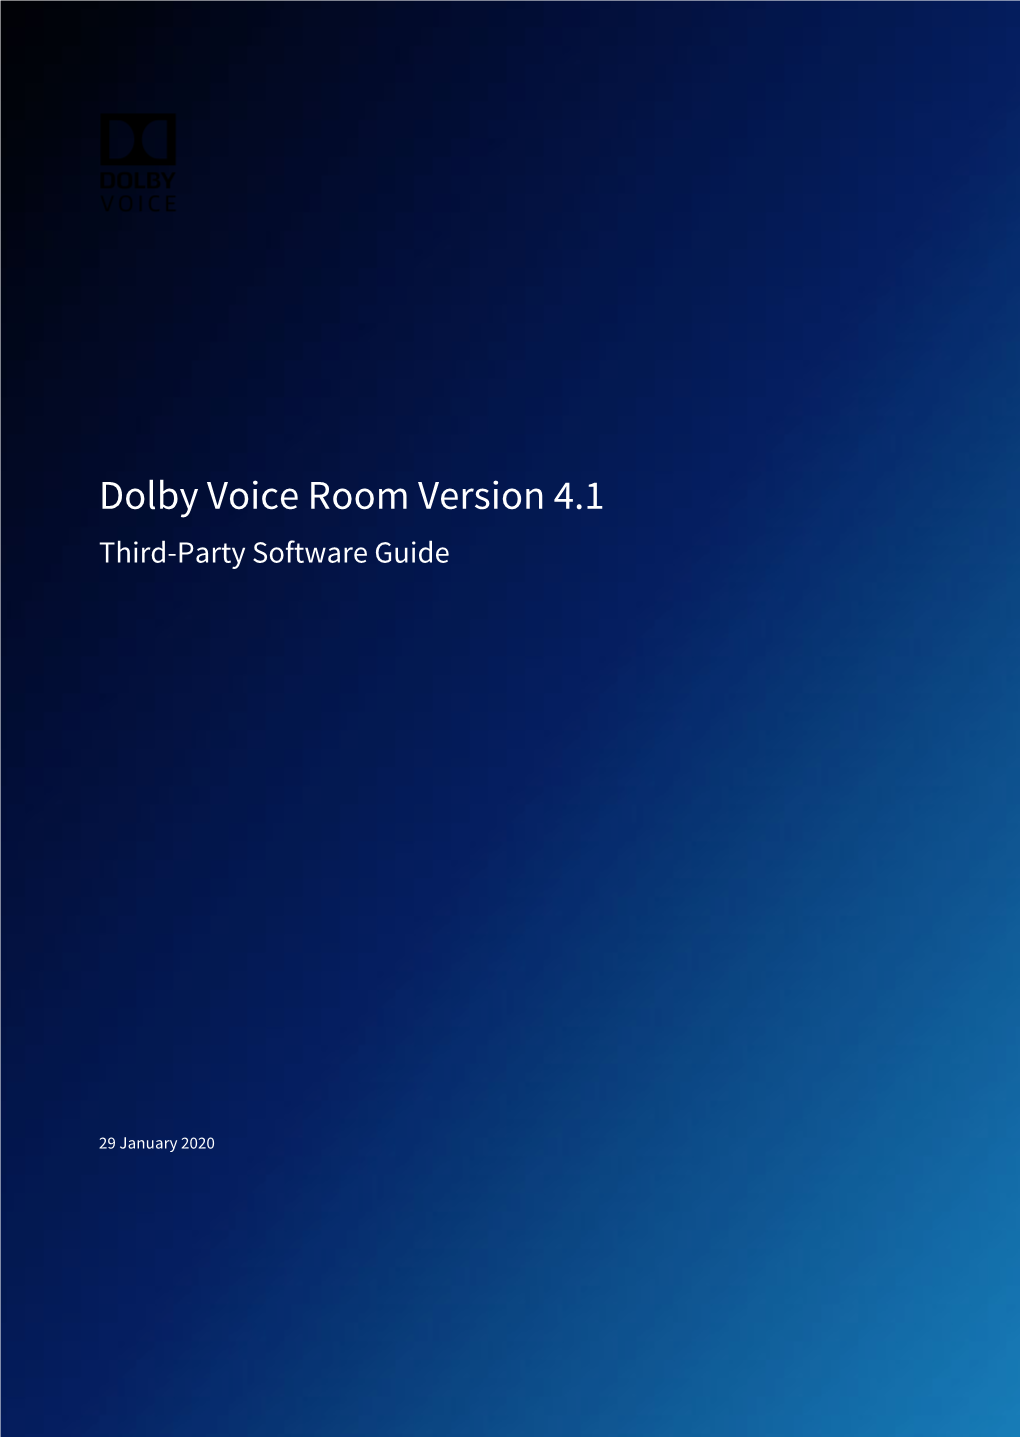 Dolby Voice Room Version 4.1 Third-Party Software Guide